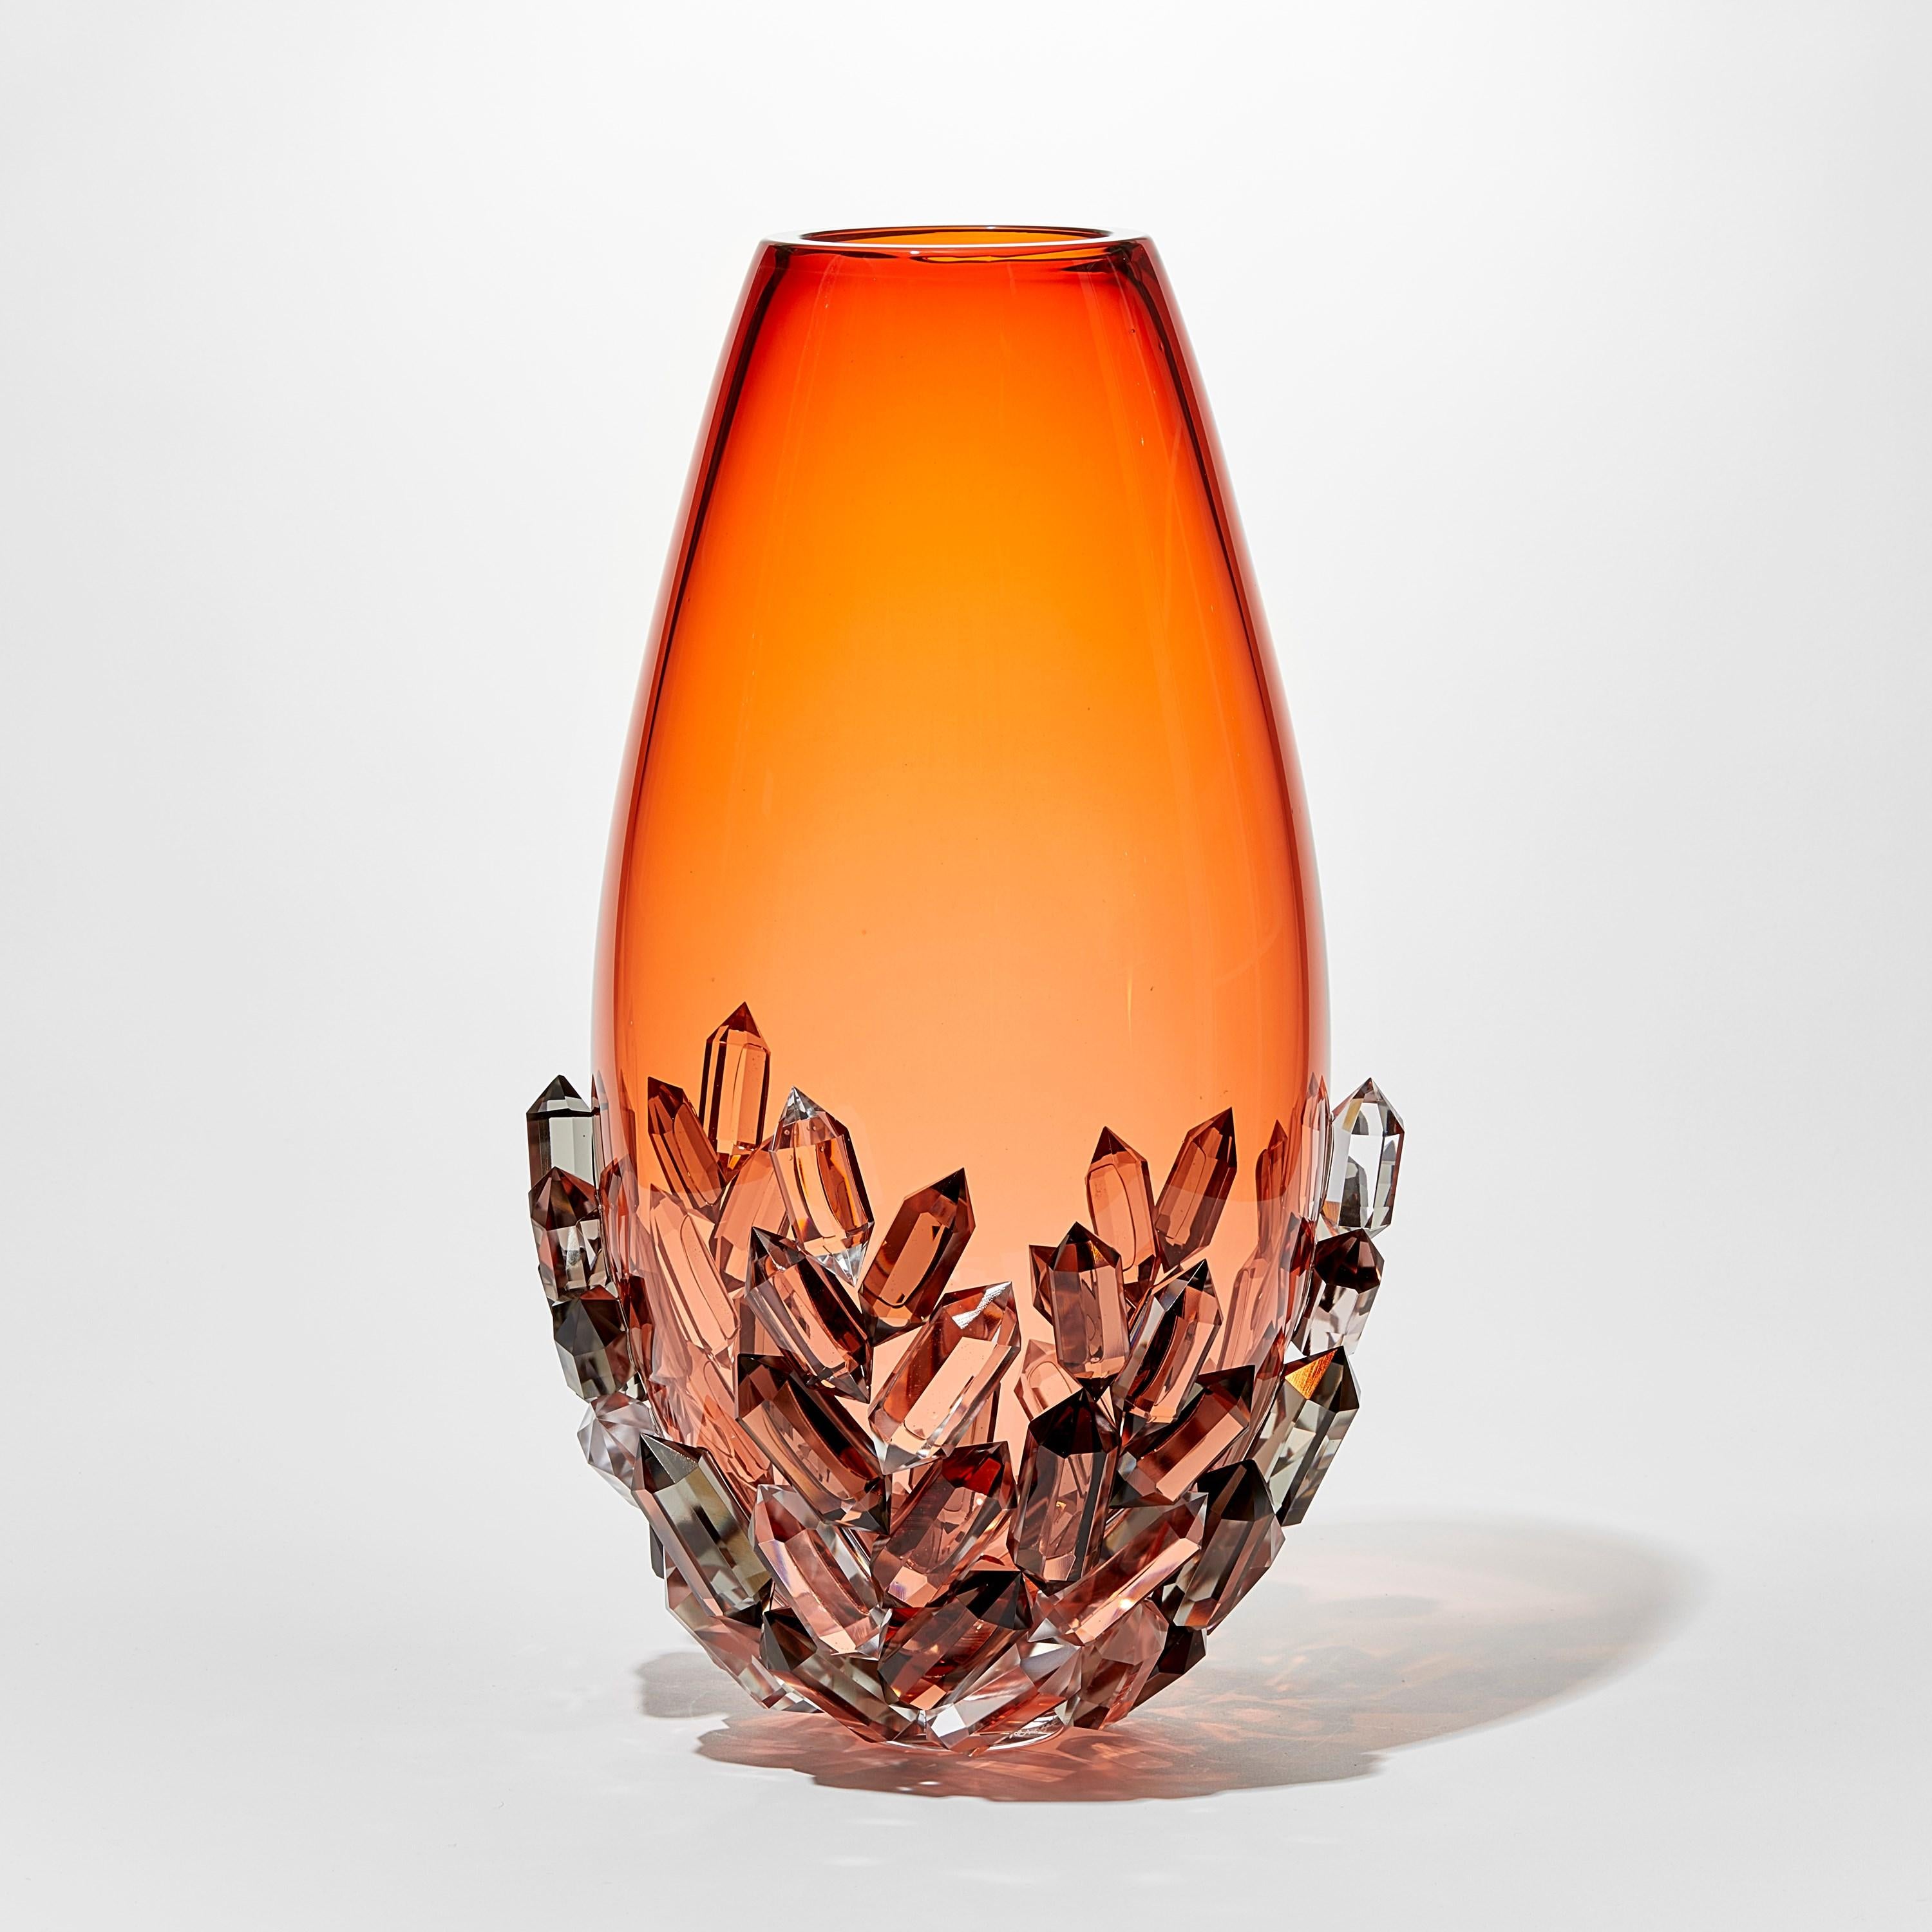 Cristallized Aurora, a peach glass vase with cut crystals by Hanne Enemark In New Condition For Sale In London, GB